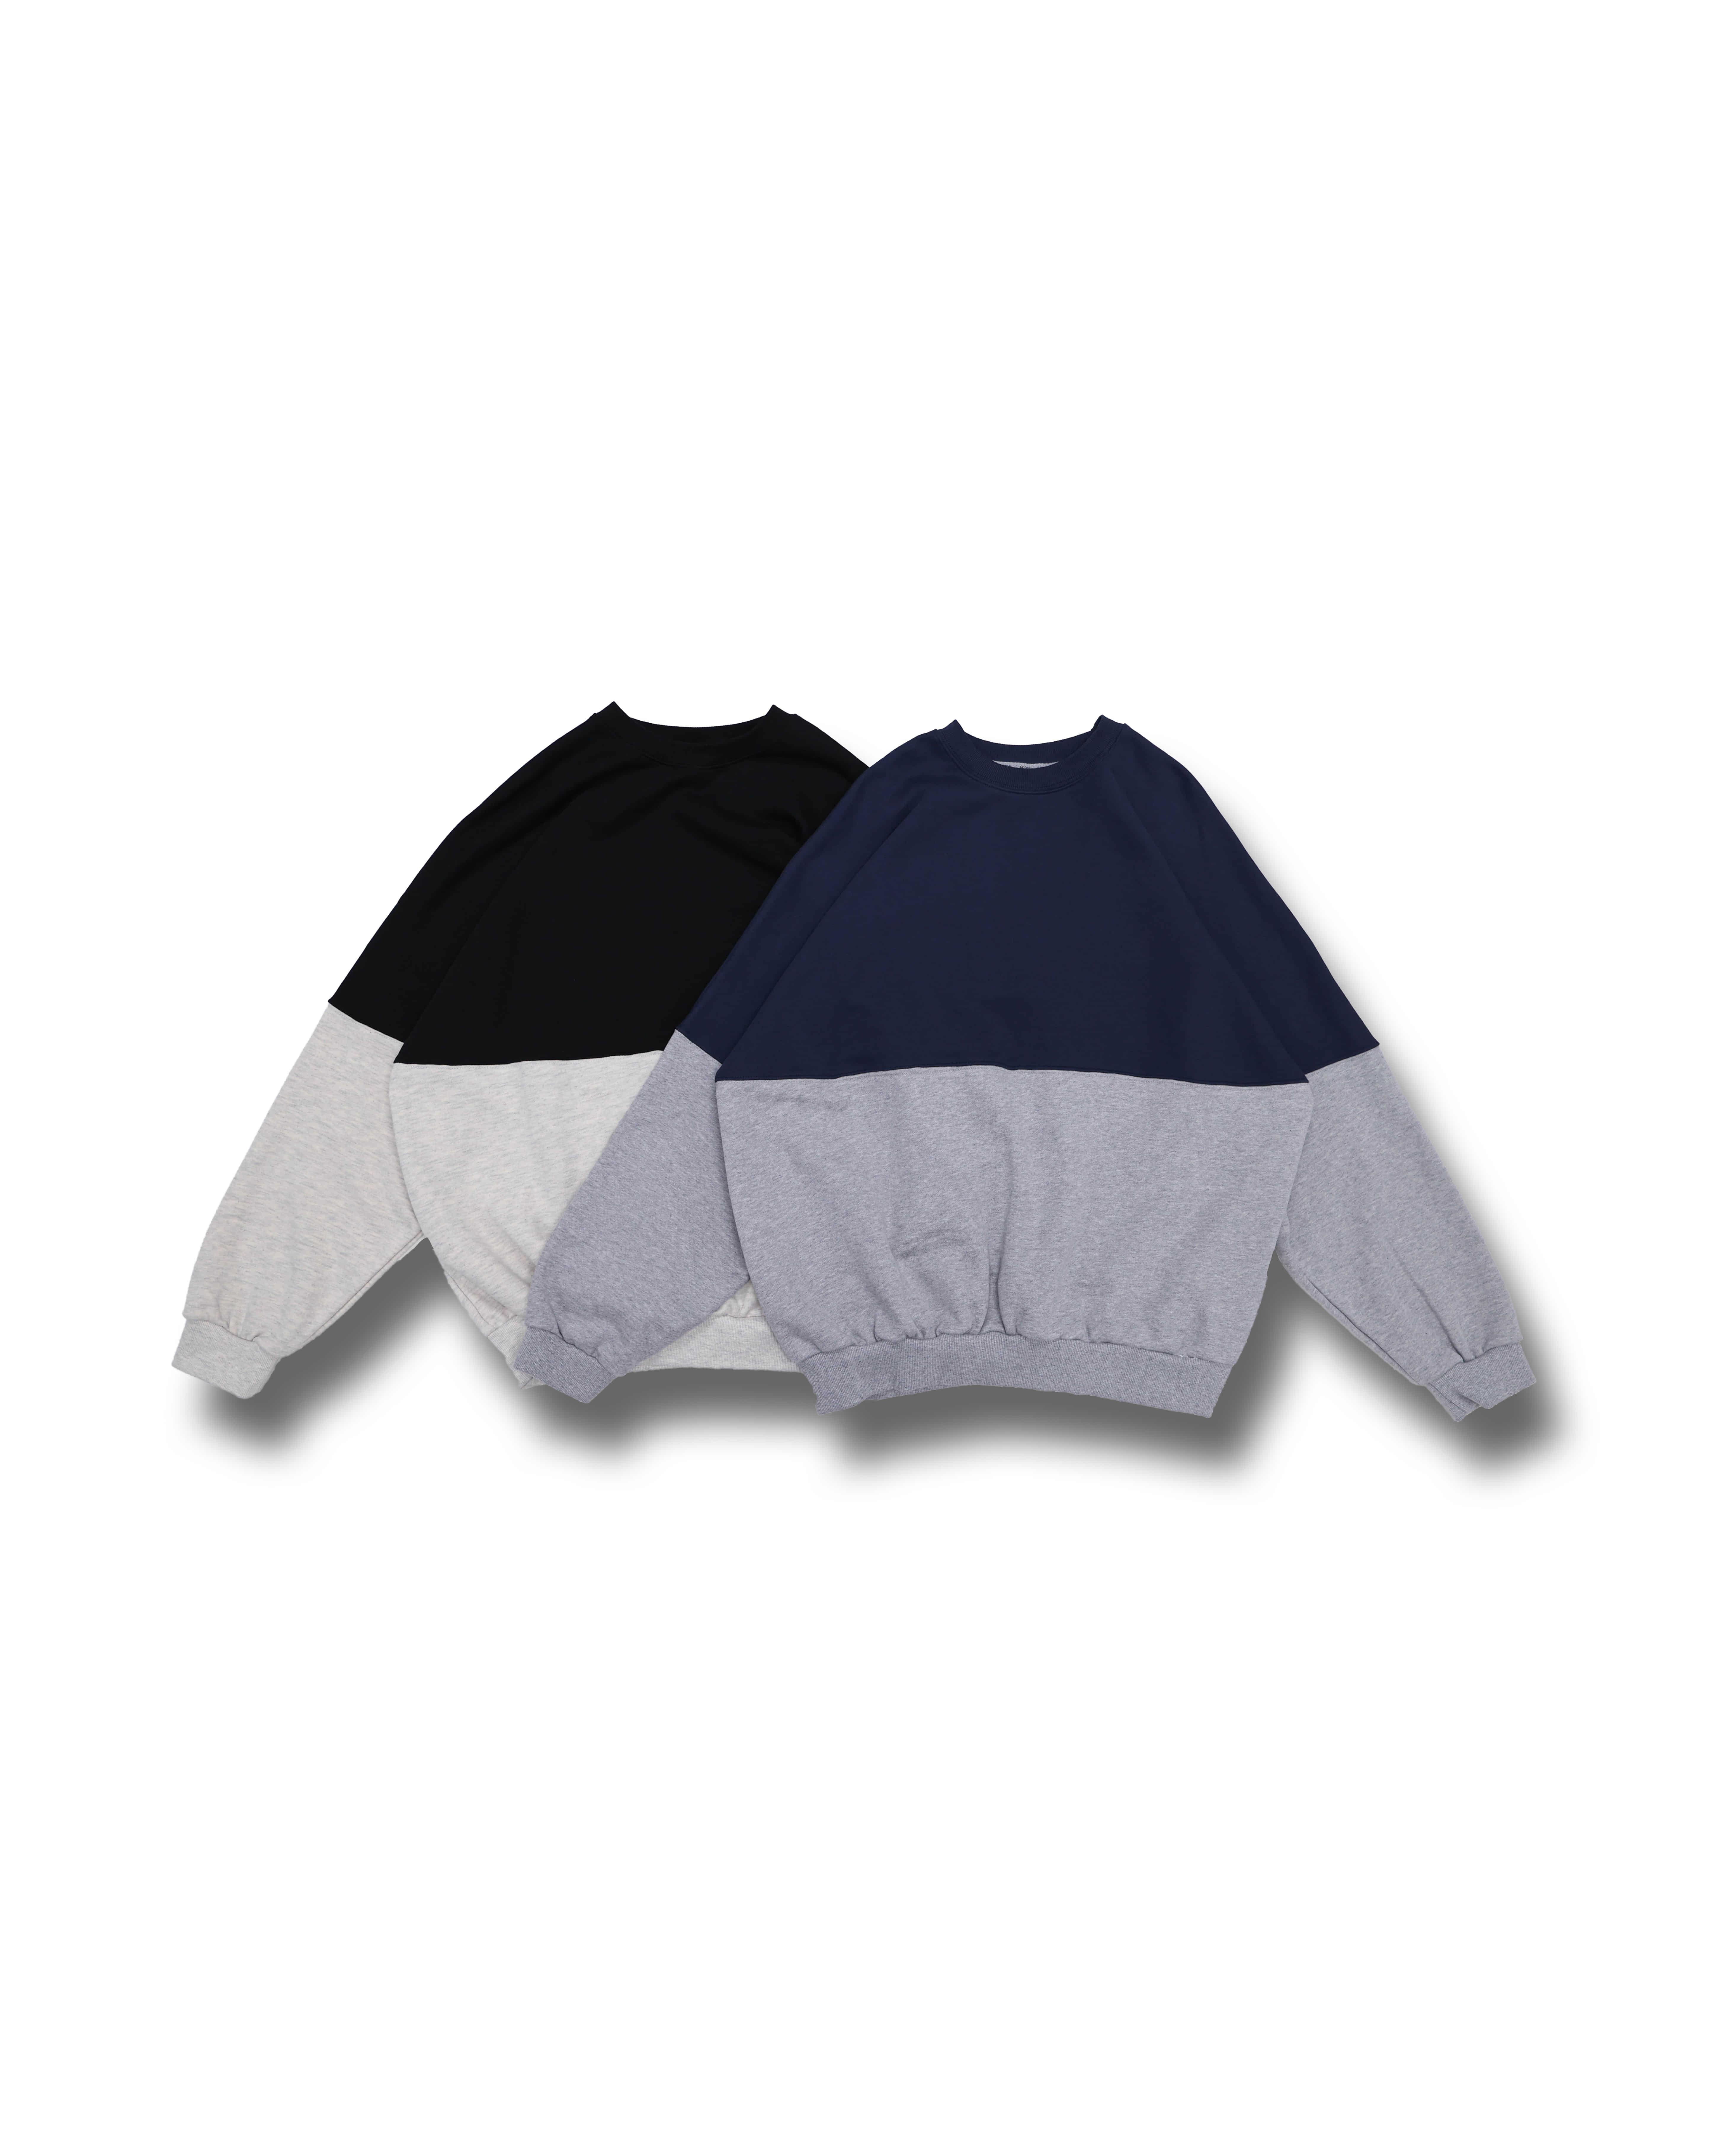 CON Two Color Sweat Shirts (Black/Navy)